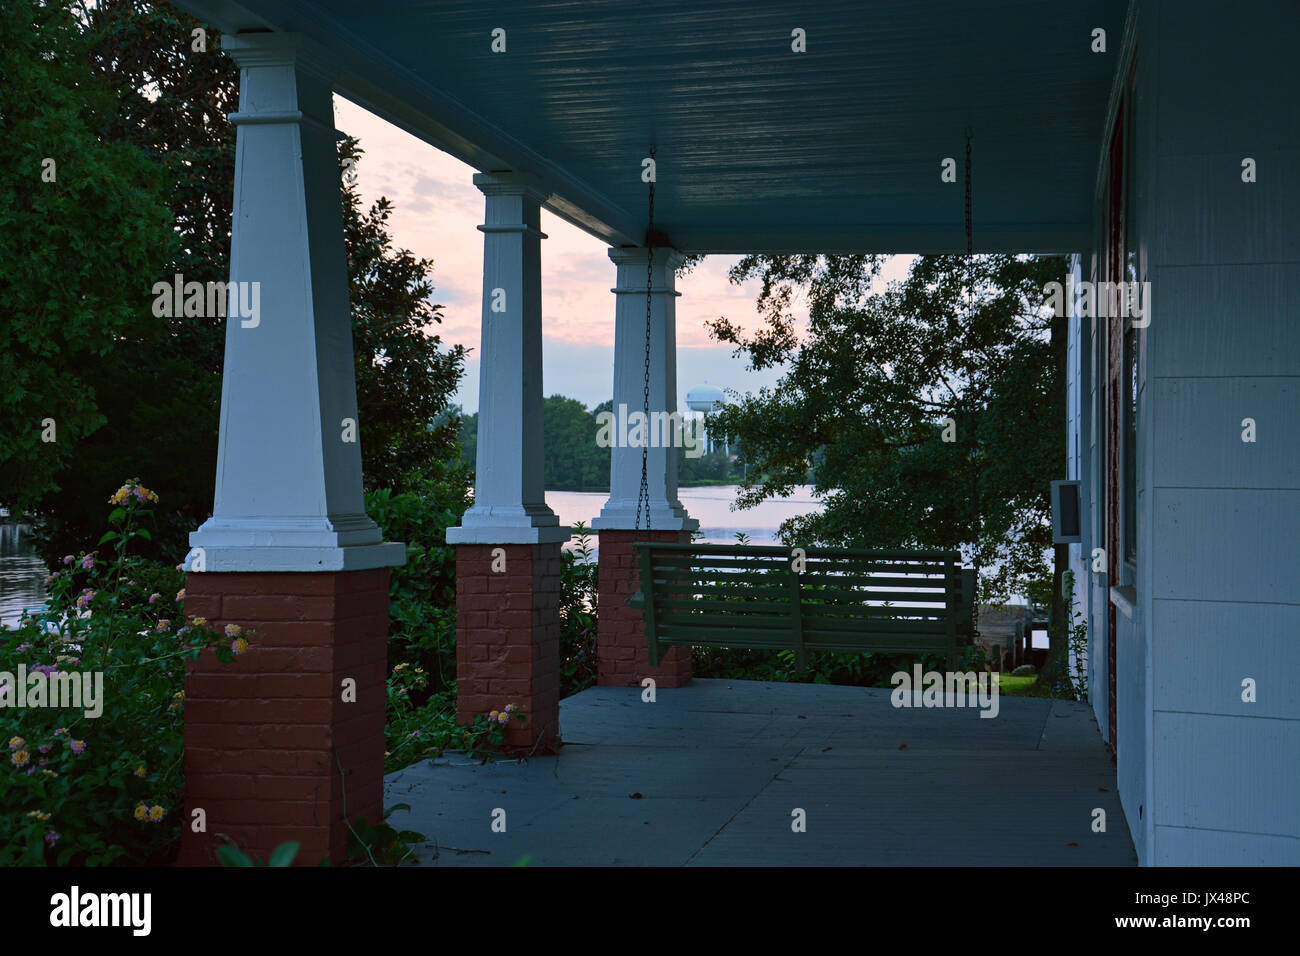 The porch of a home overlooking the Perquiman's river at sunset in the small town of Hertford North Carolina. Stock Photo